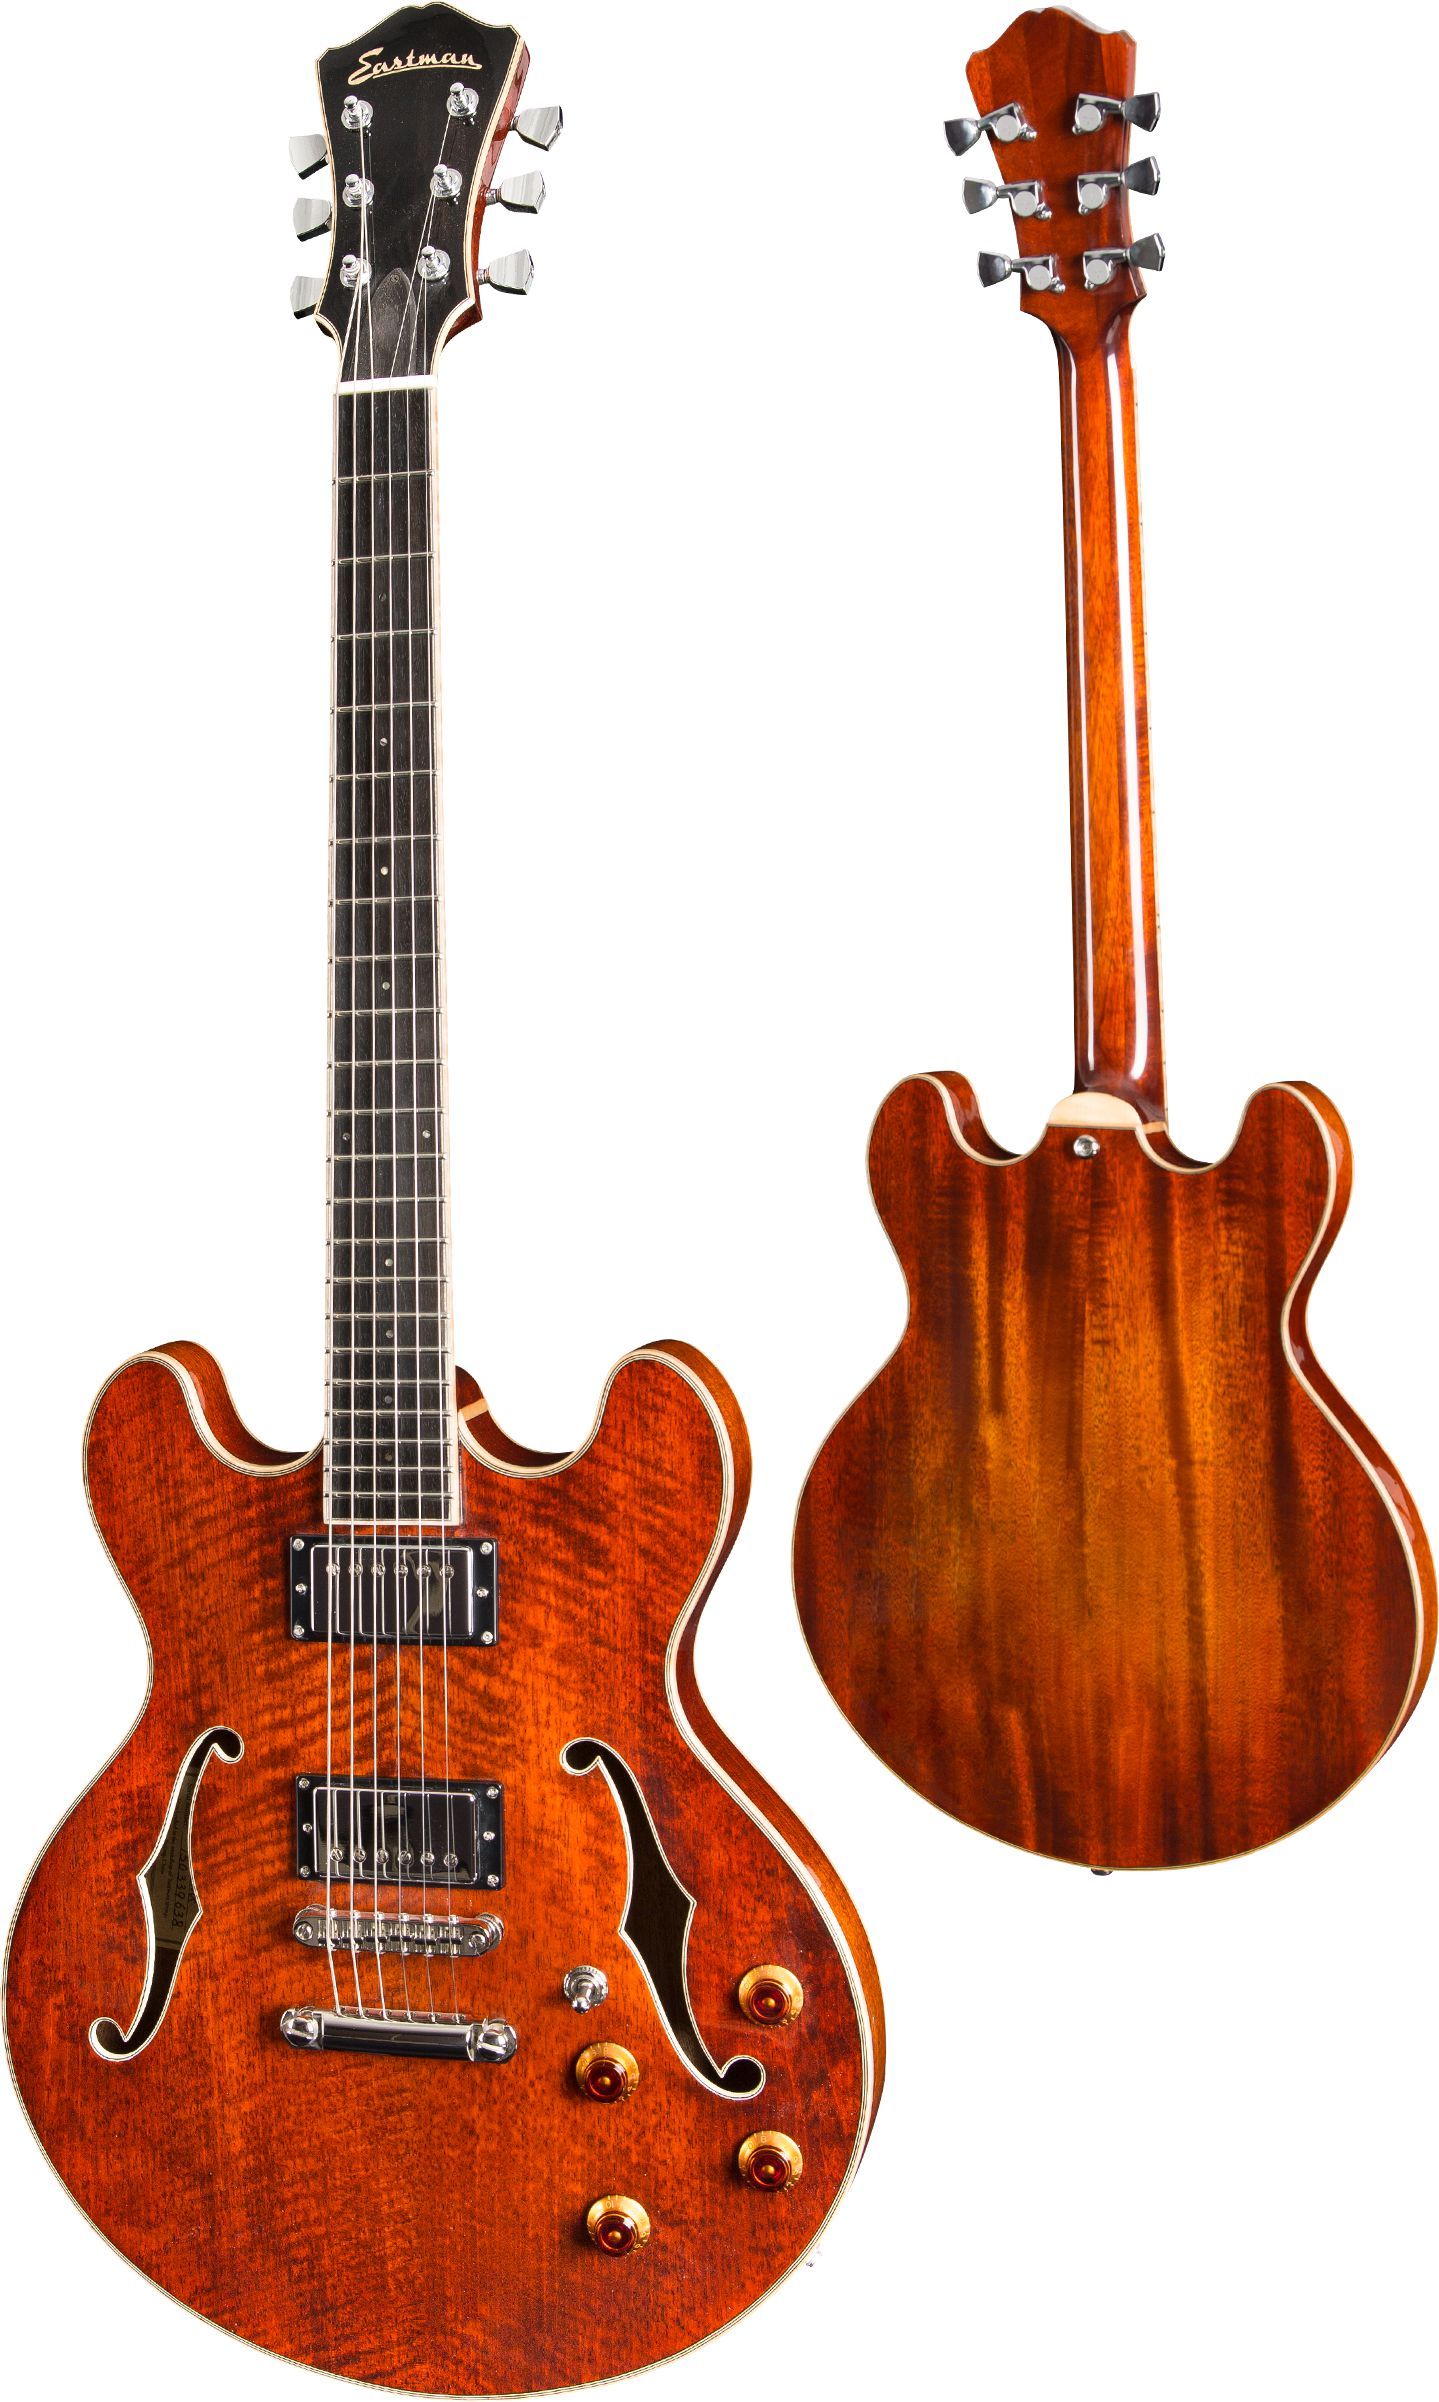 Eastman T185mx CL, Electric Guitar for sale at Richards Guitars.